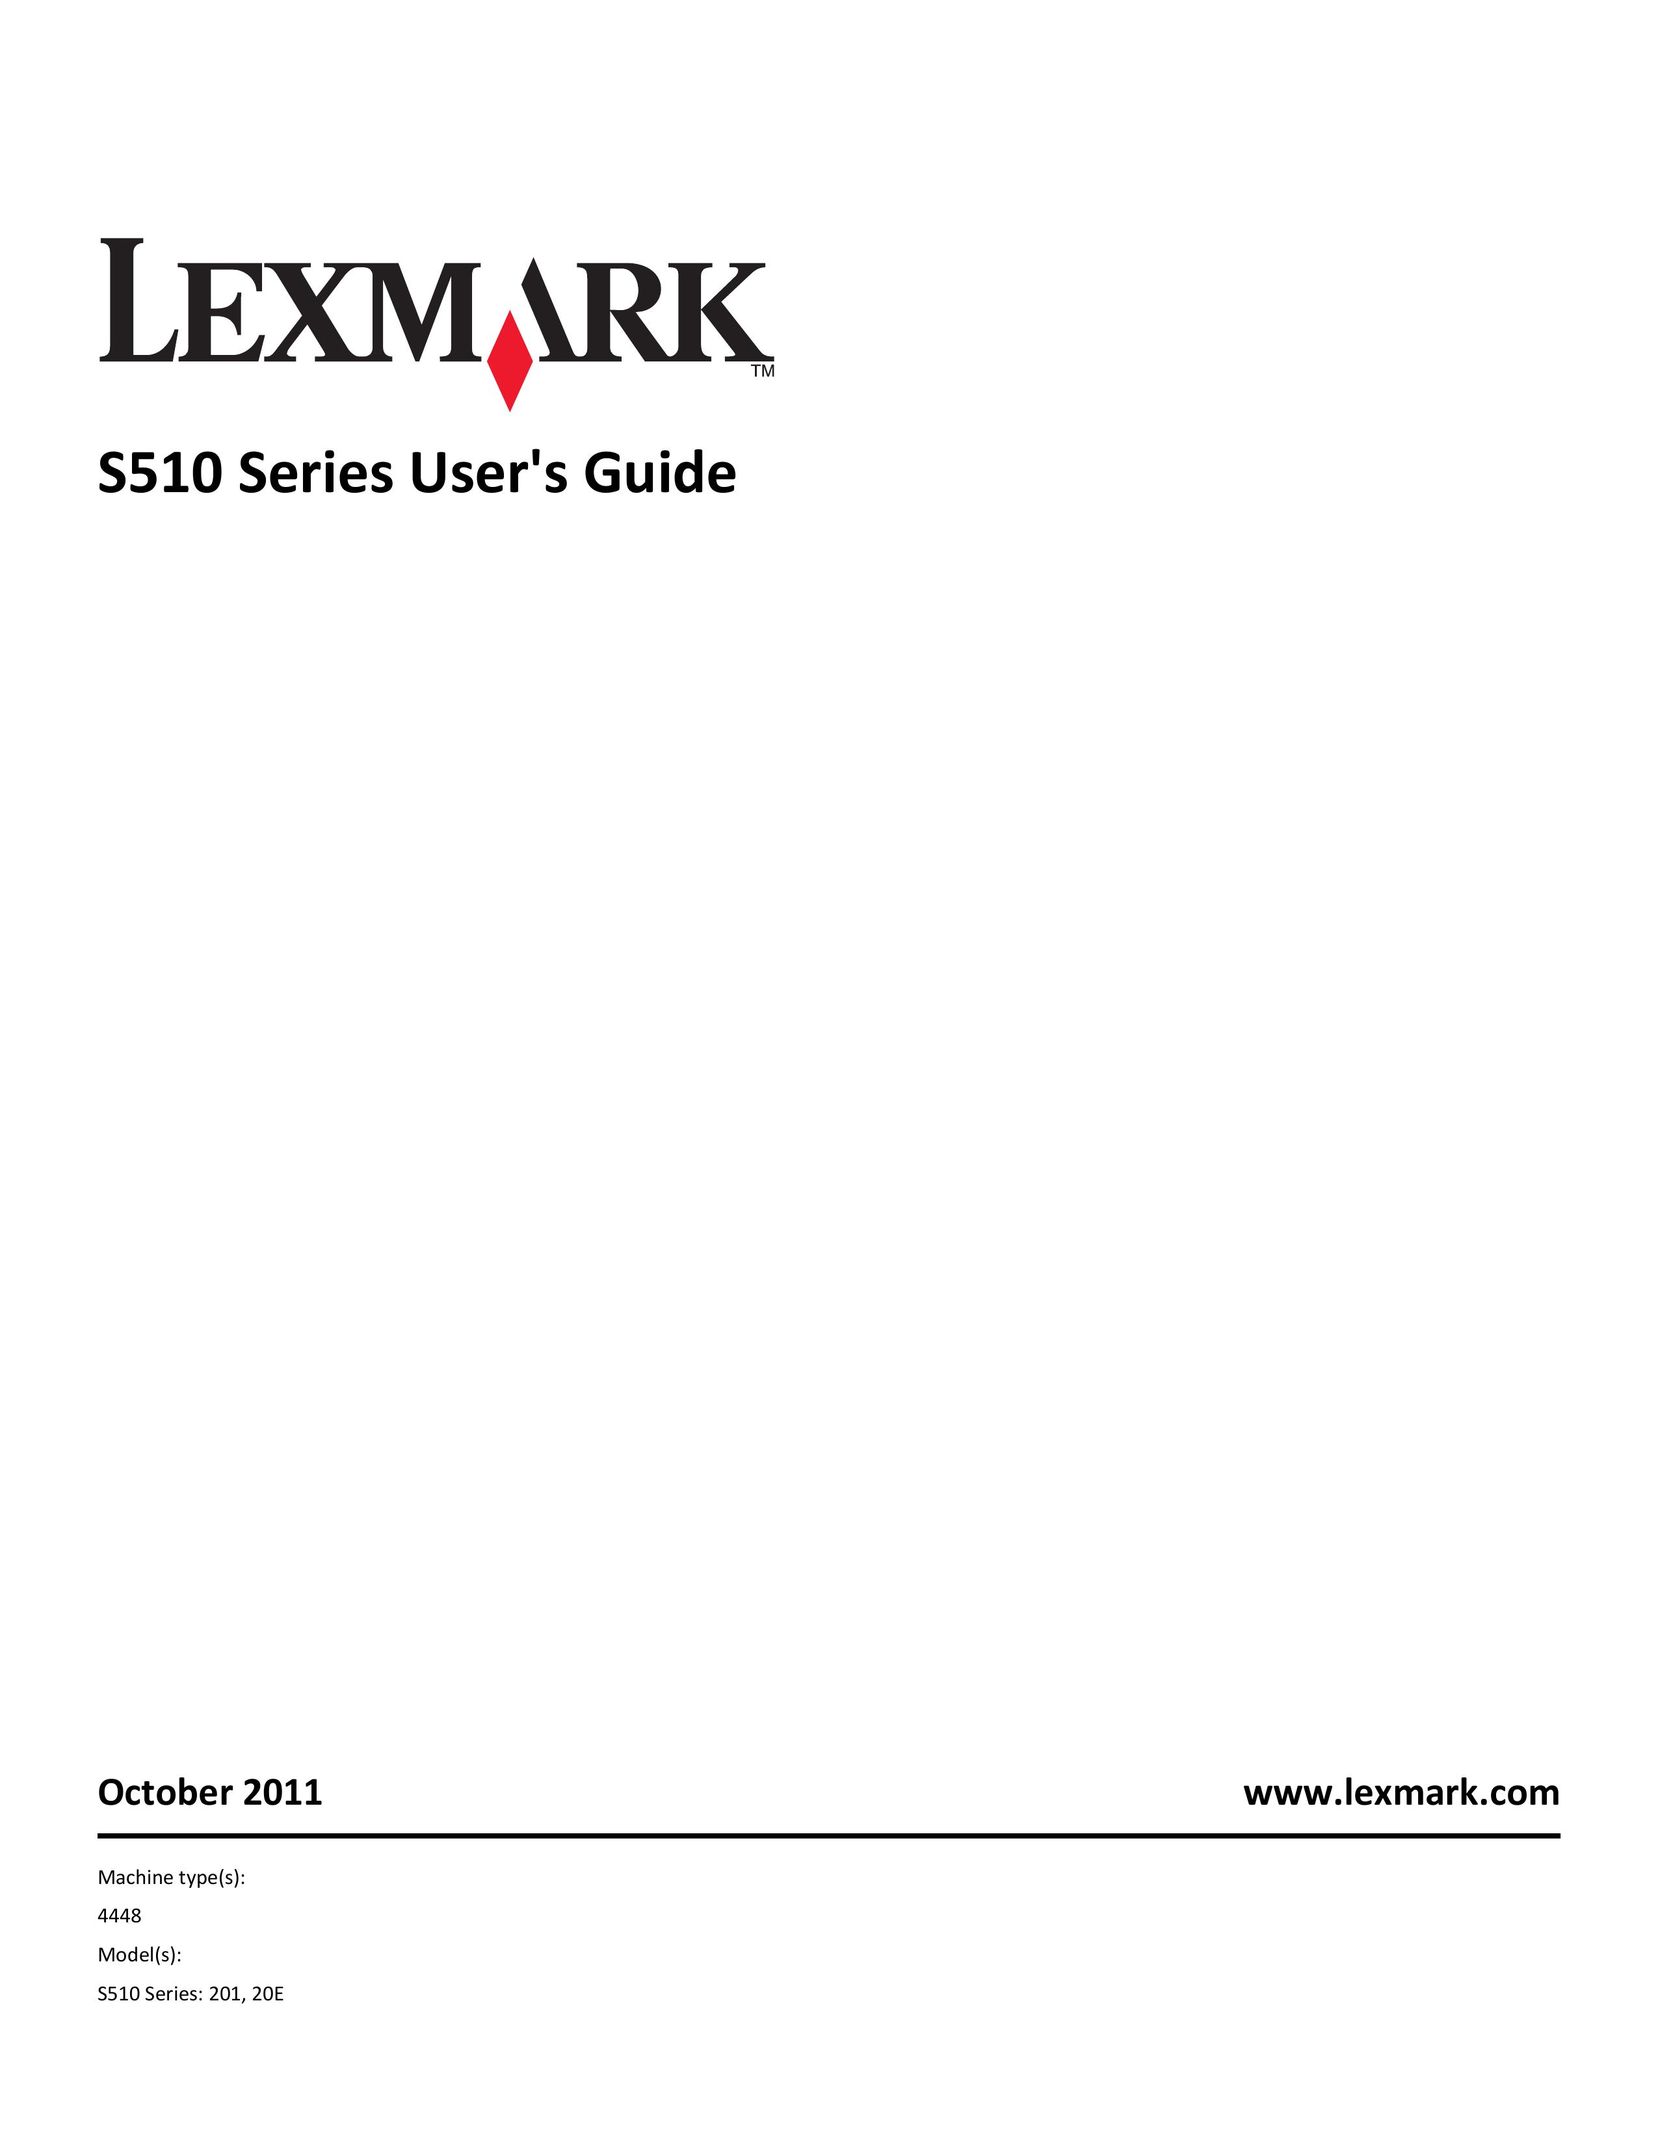 Lexmark 201 All in One Printer User Manual (Page 1)